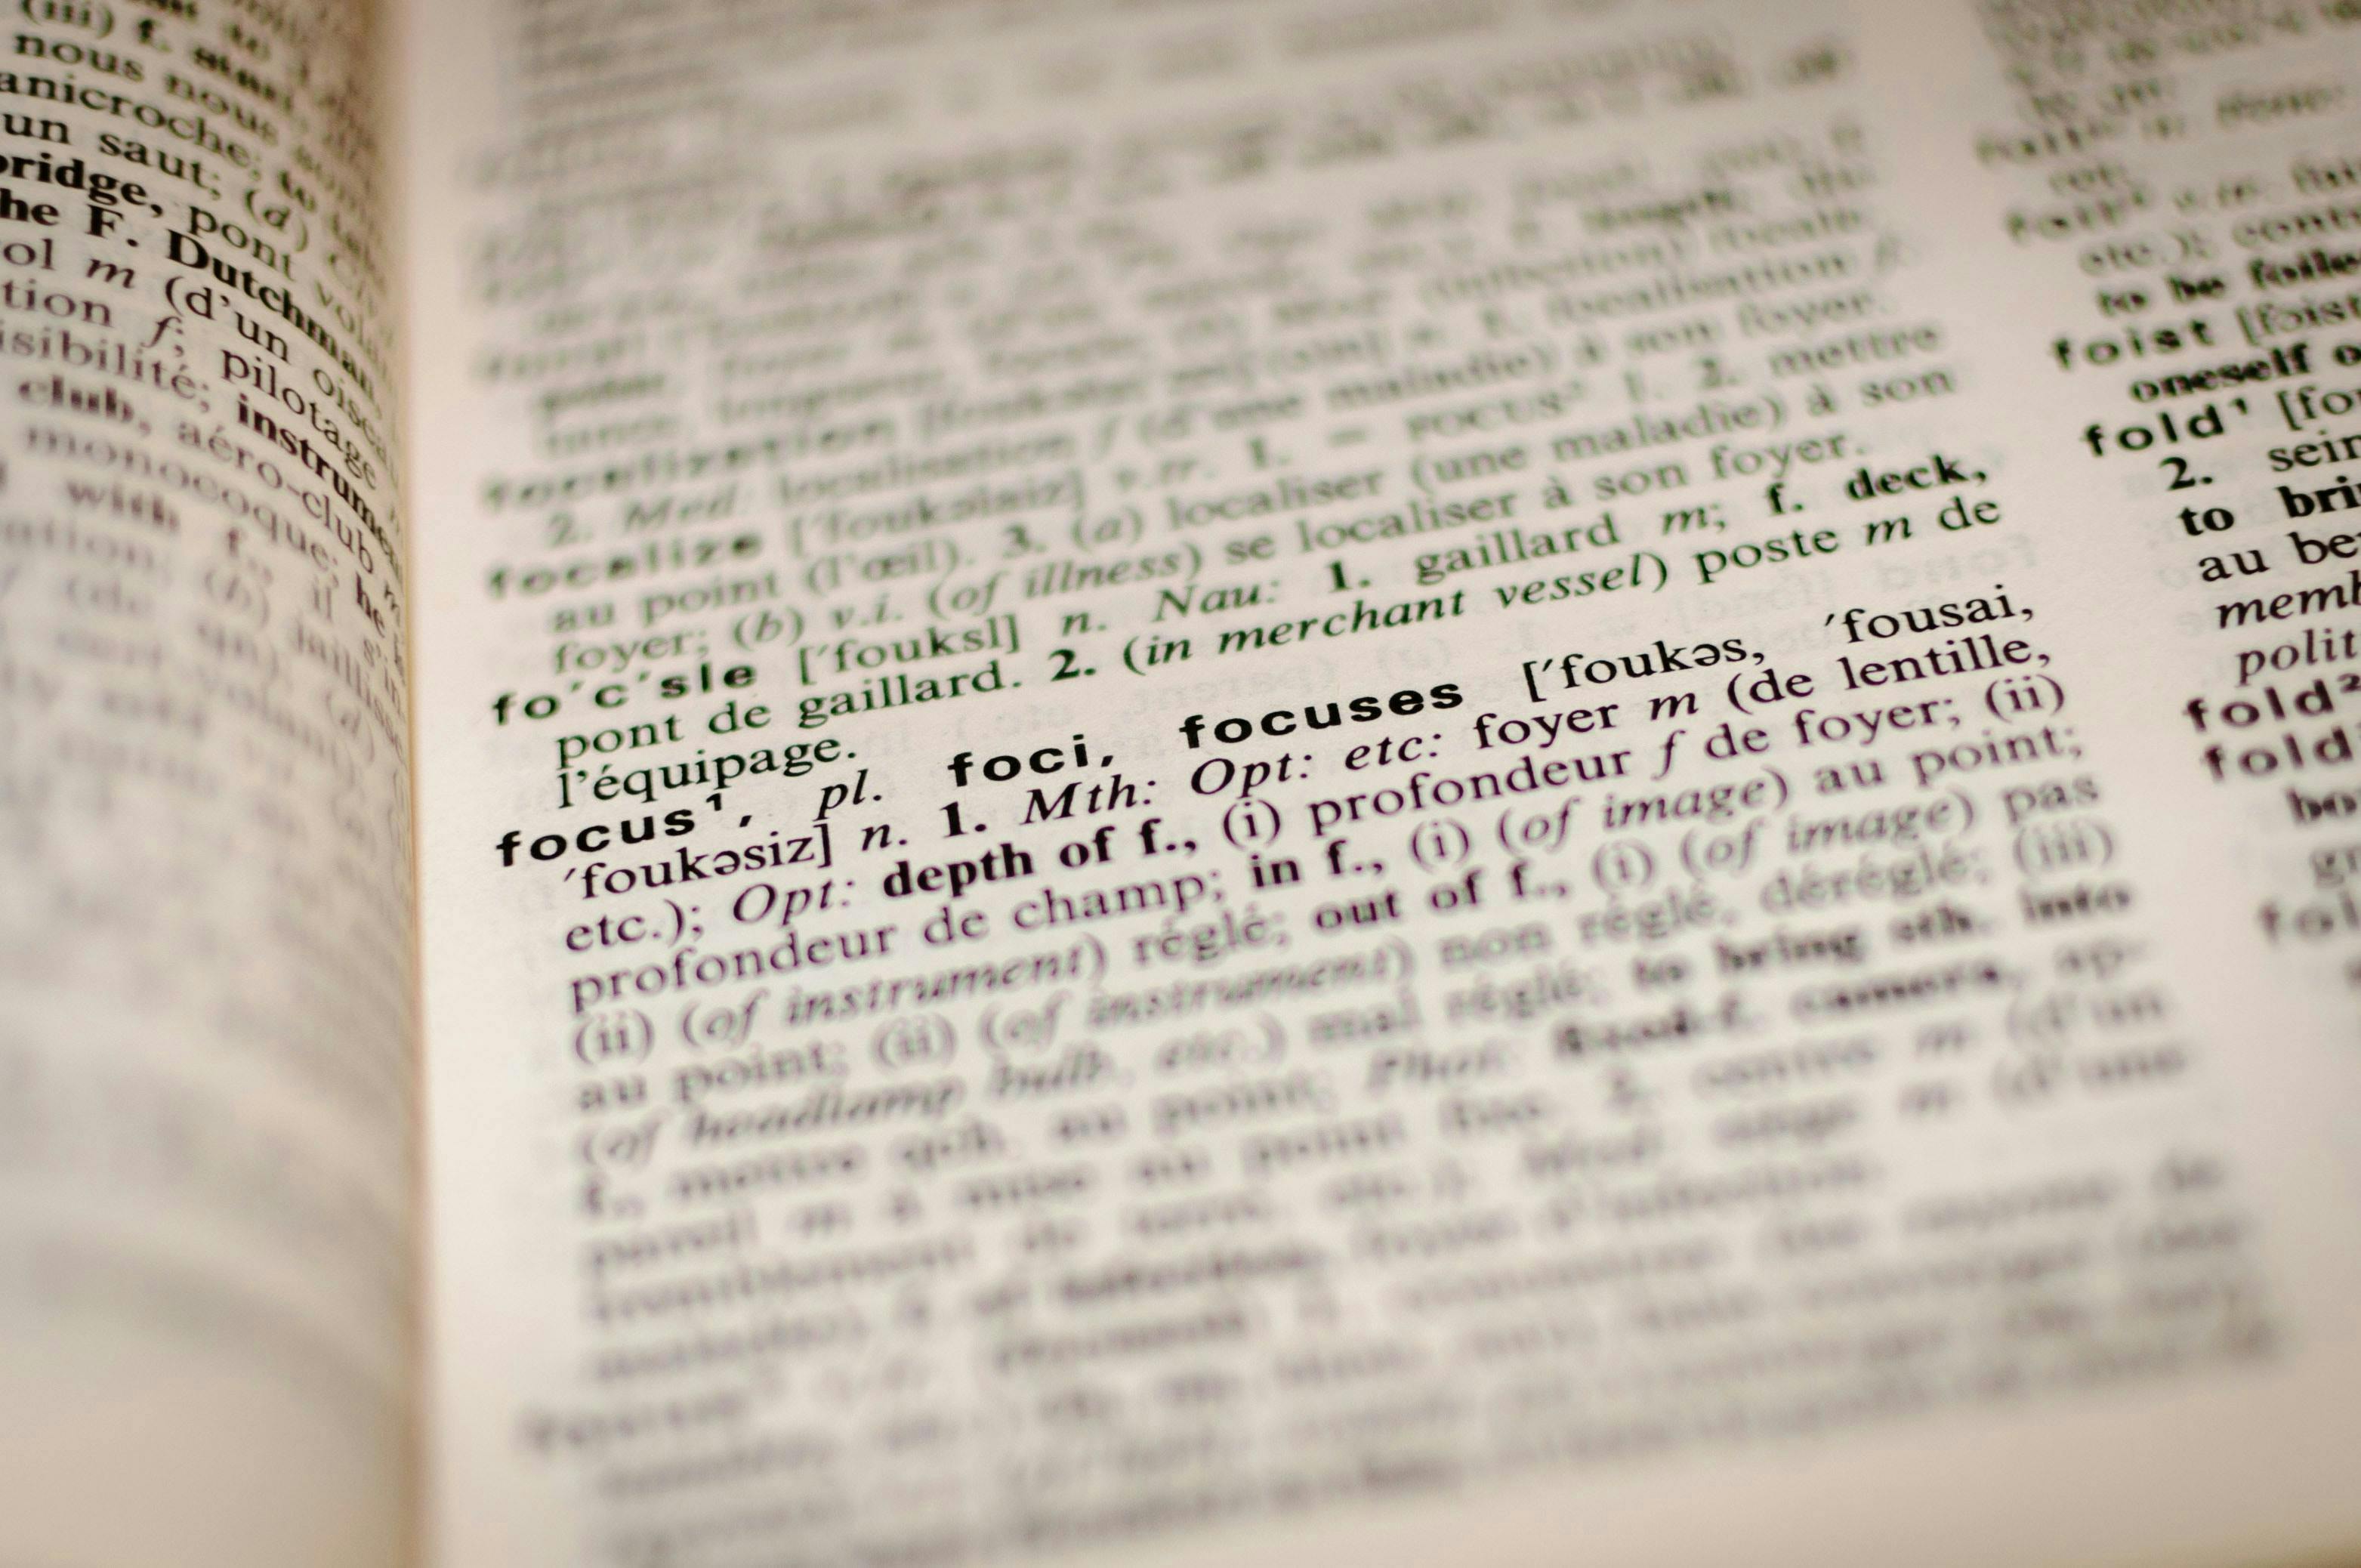 Open dictionary displaying the definition of "focus" in English and French, highlighting the word in bold text within a page full of other entries and definitions.